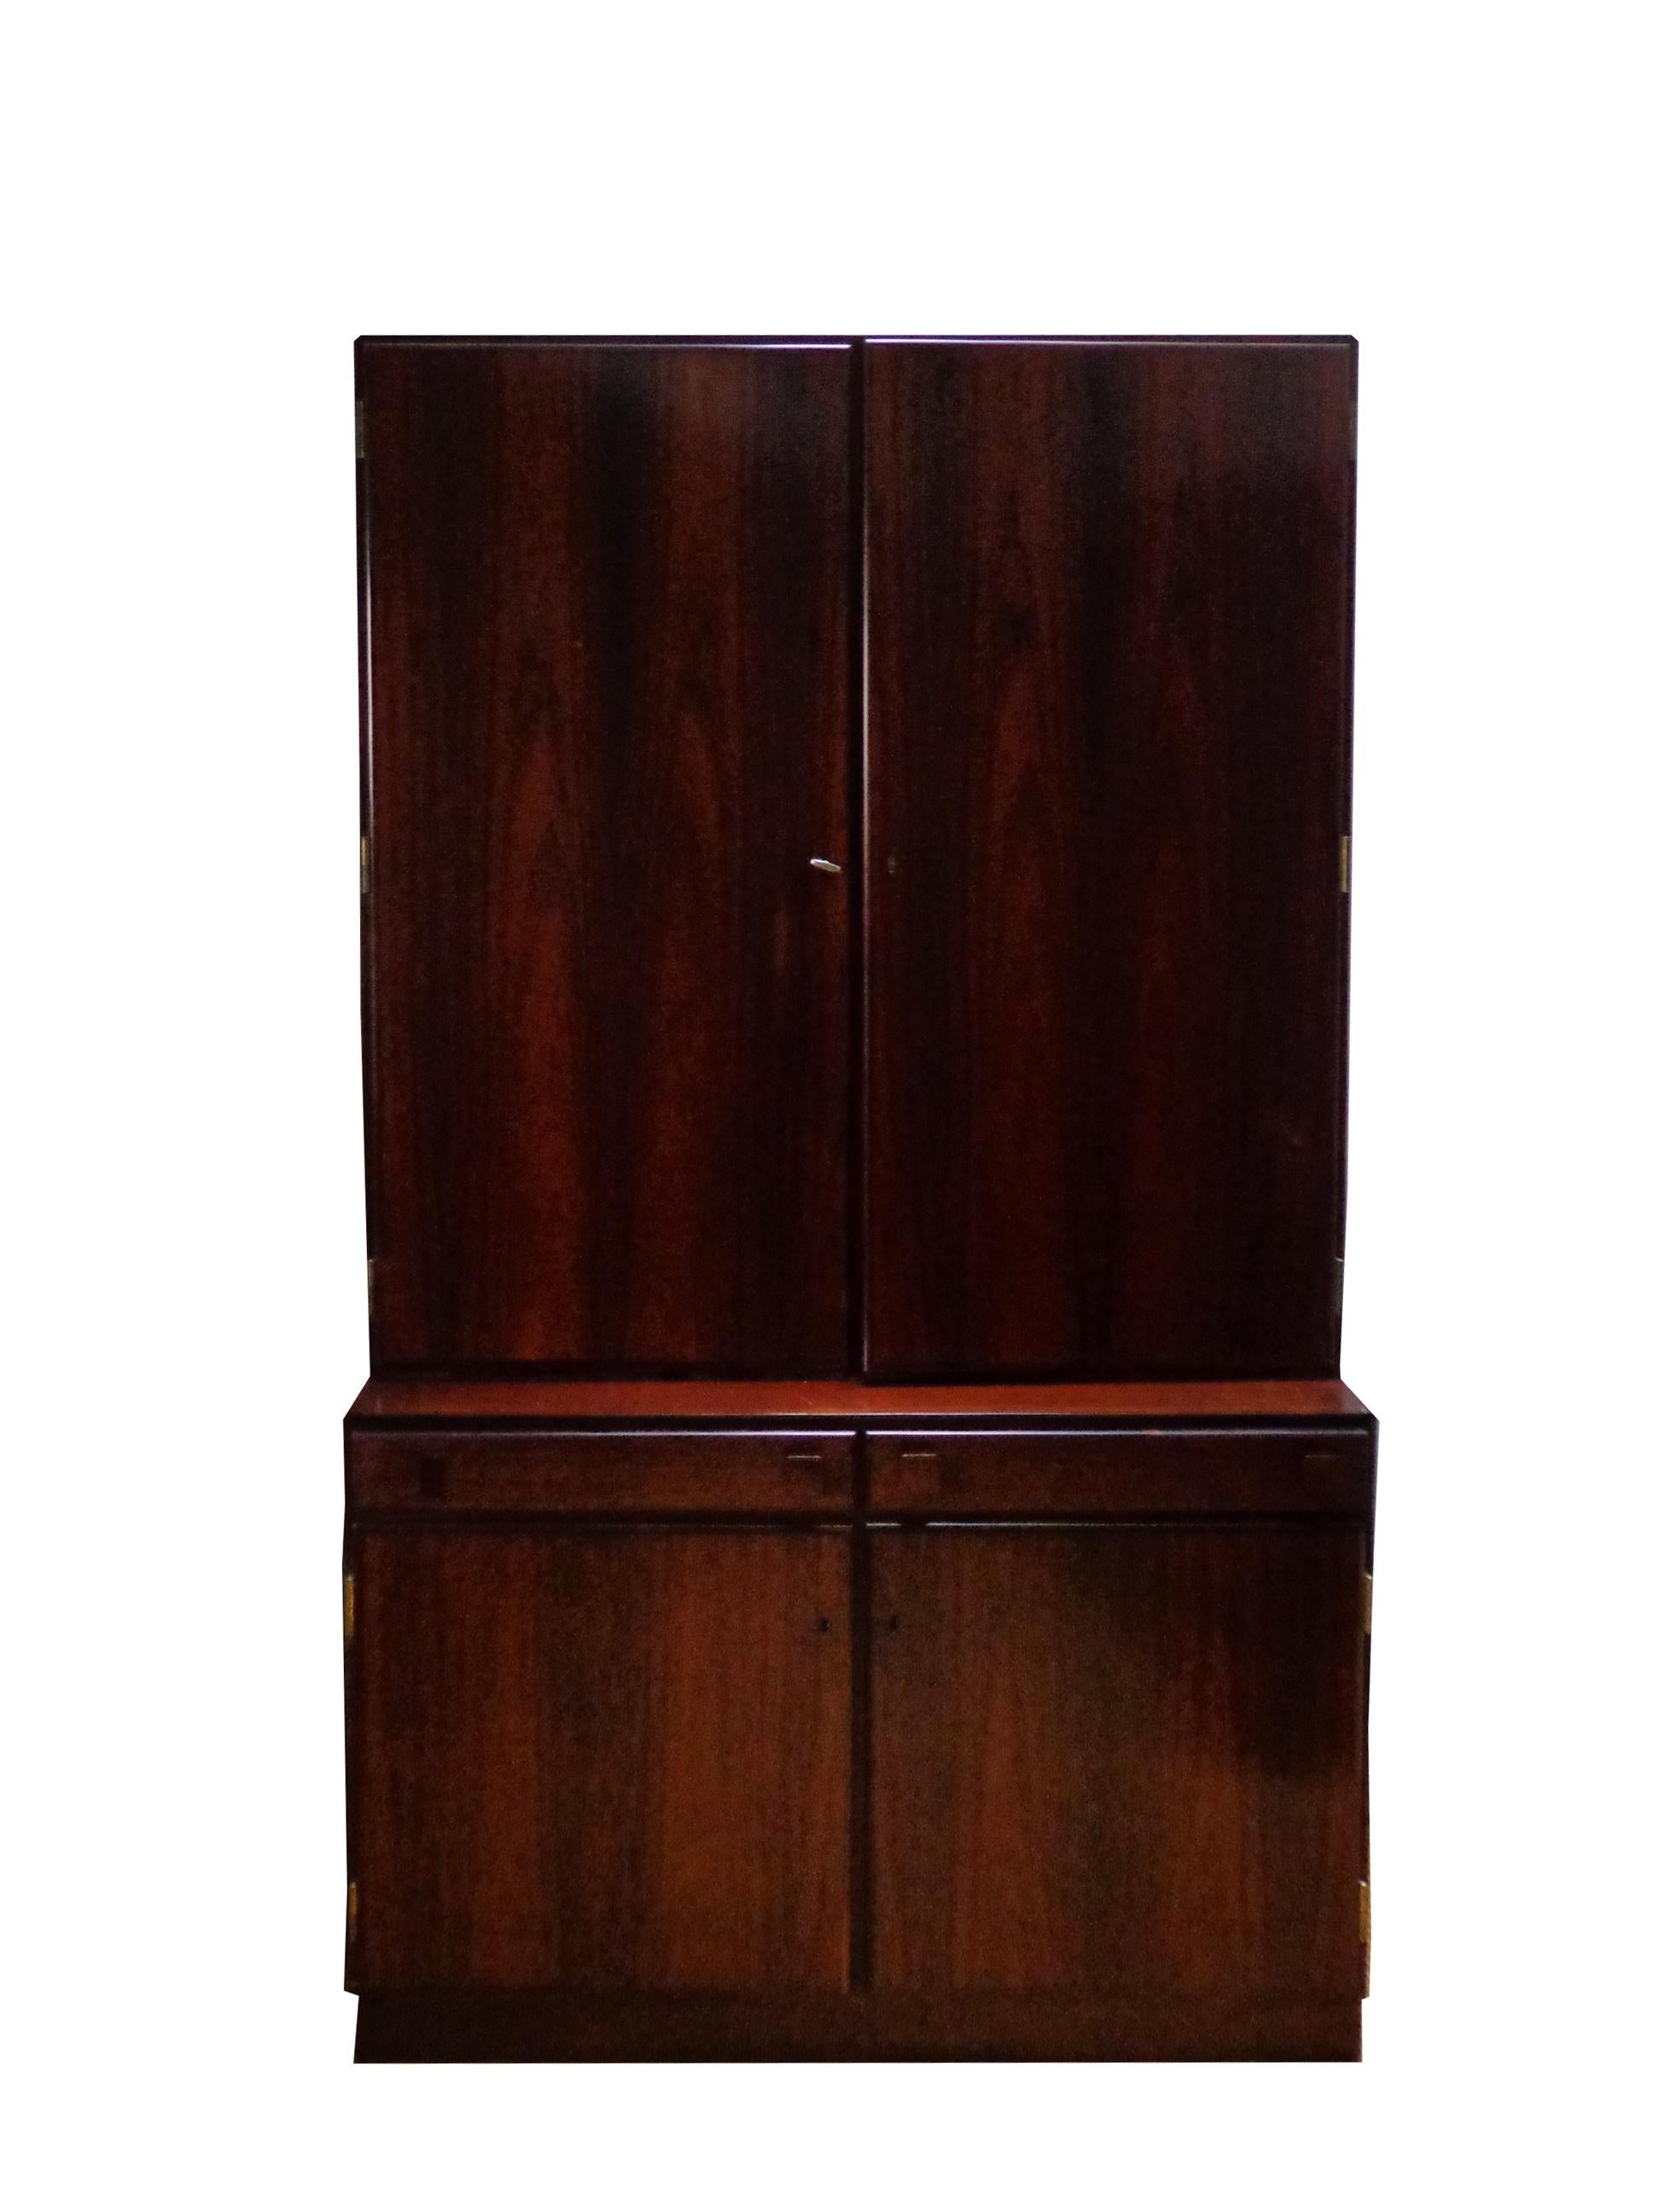 Wall unit of rosewood designed by Takashi Okamura and Erik Marquardsen, consisting base cabinet with doors and shelves inside. Top cabinet with pullout trays, shelves. Original keys included.
Manufactured by O. Bank Larsen Møbelfabrik. Signed with